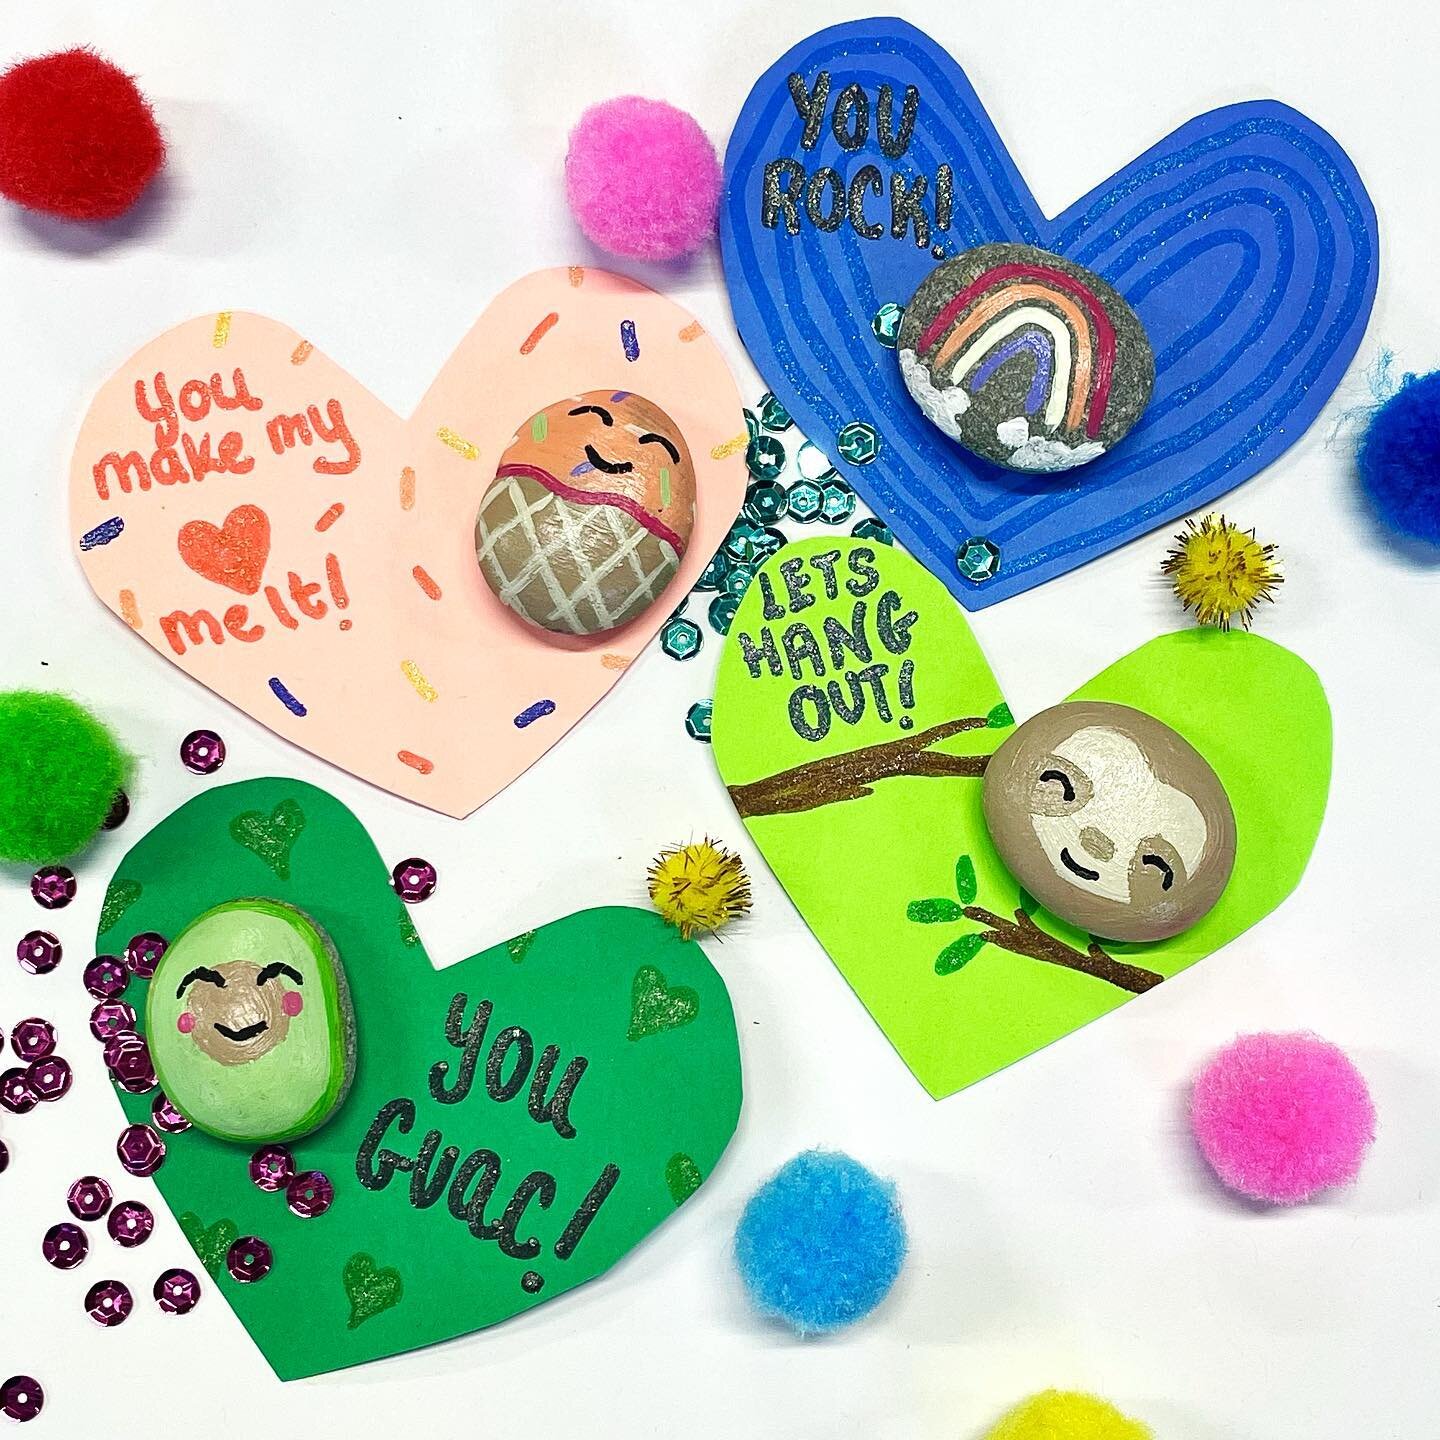 Painted stones for your valentine🥰 how adorable are these hand painted rocks?! Perfect for kids!

#valentines #kids #kidsvalentines #valentineideas #kidscraftclub #kidsactivitiesideas #art #artsandcrafts #craftideas